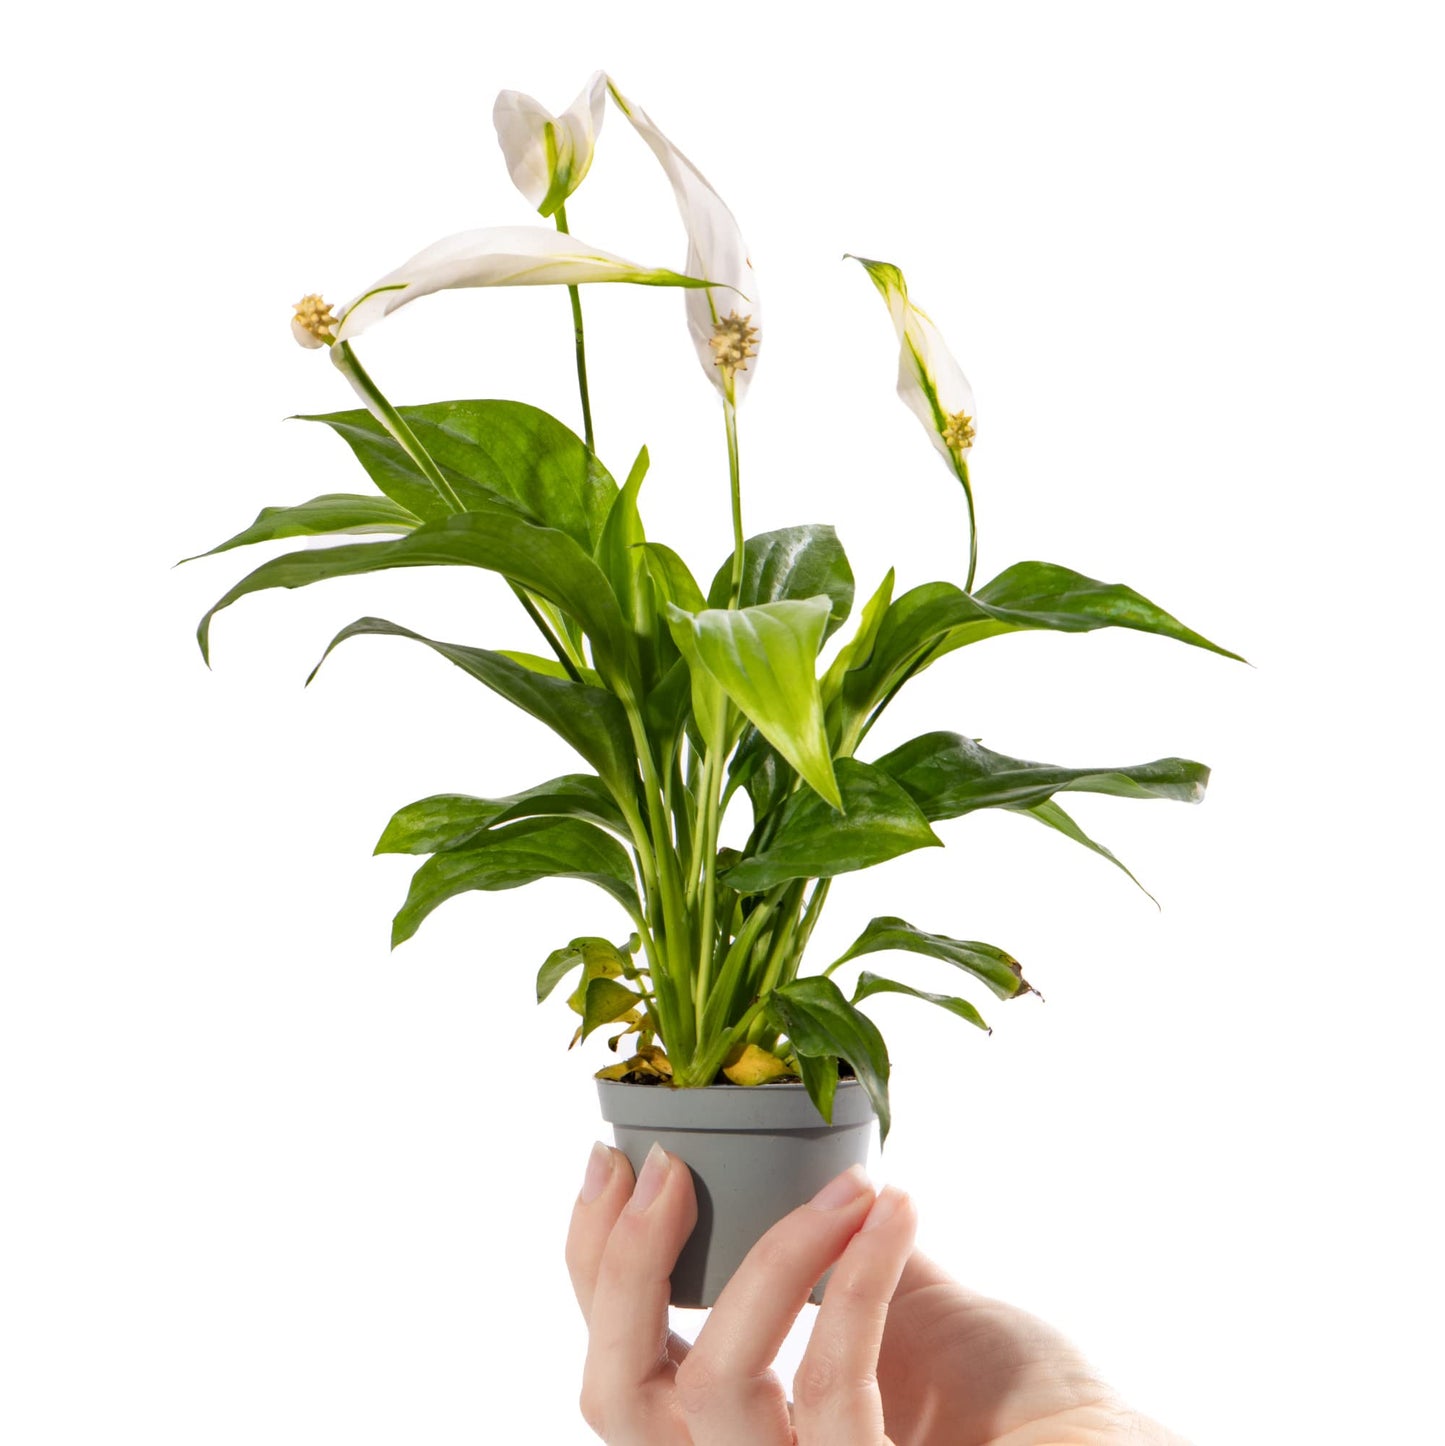 Spathiphyllum Pearl Cupido - Peace Lilly Plant - Indoor Flowering House Plant - نبات داخلي